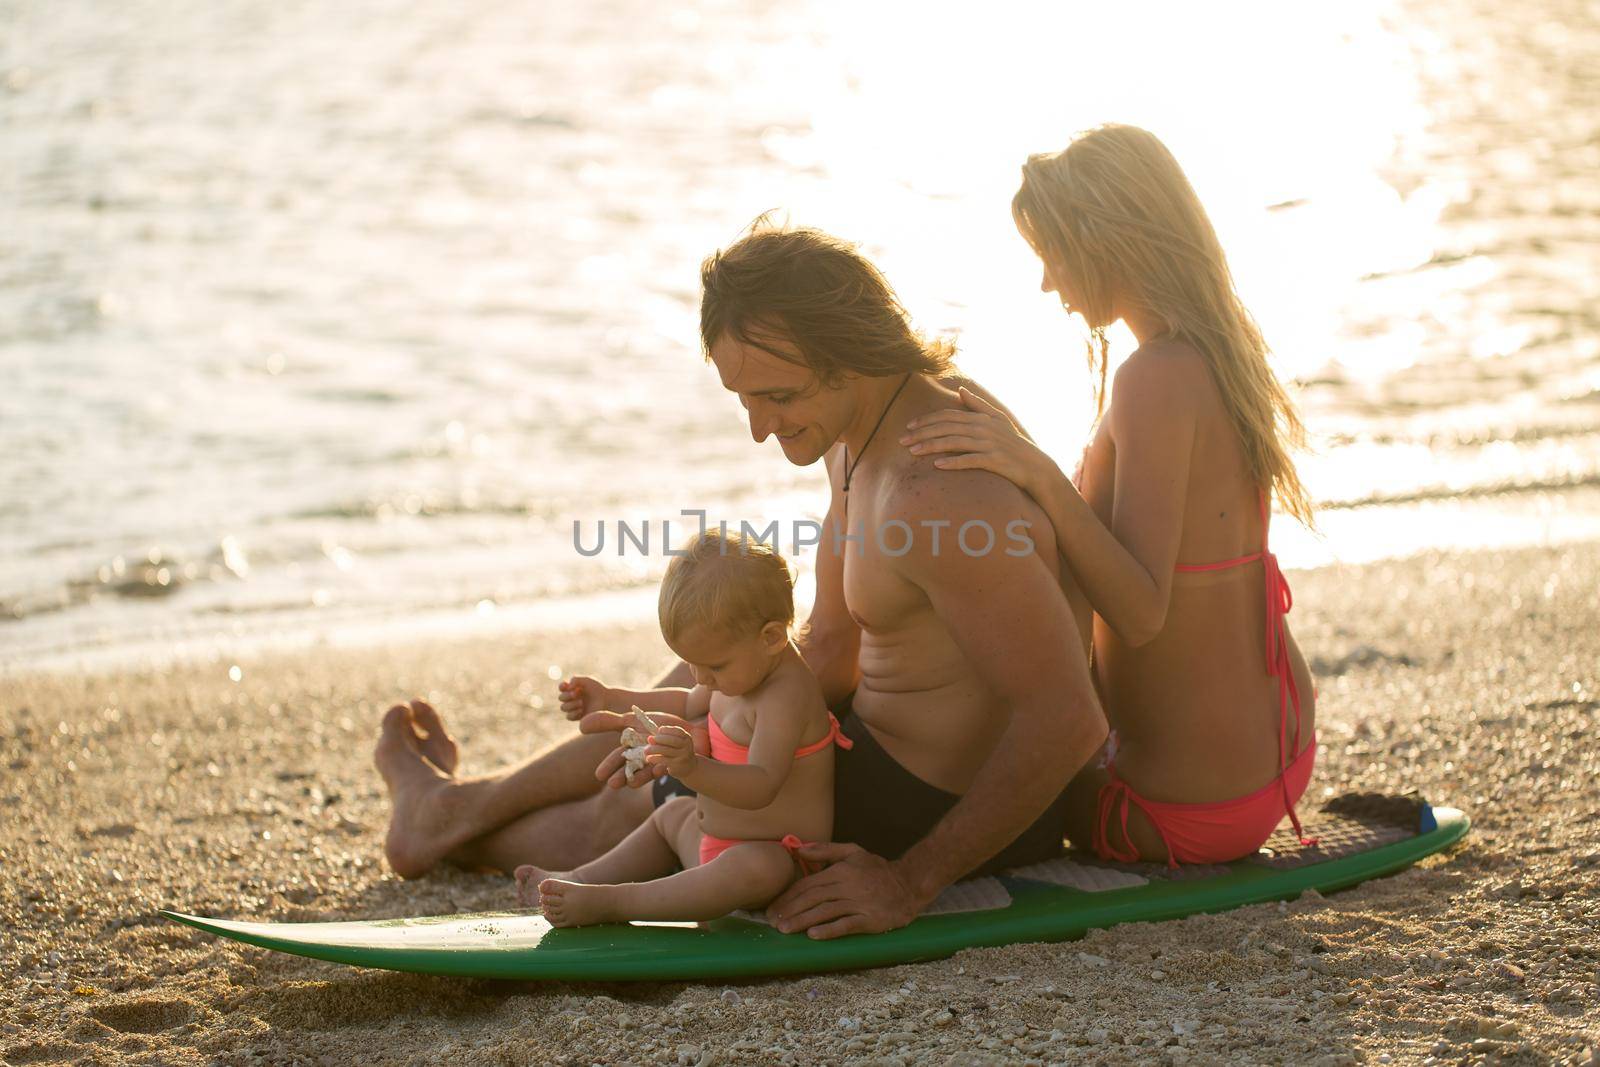 surfing. happy family sits on the surfboard. concept about family, sport and fun